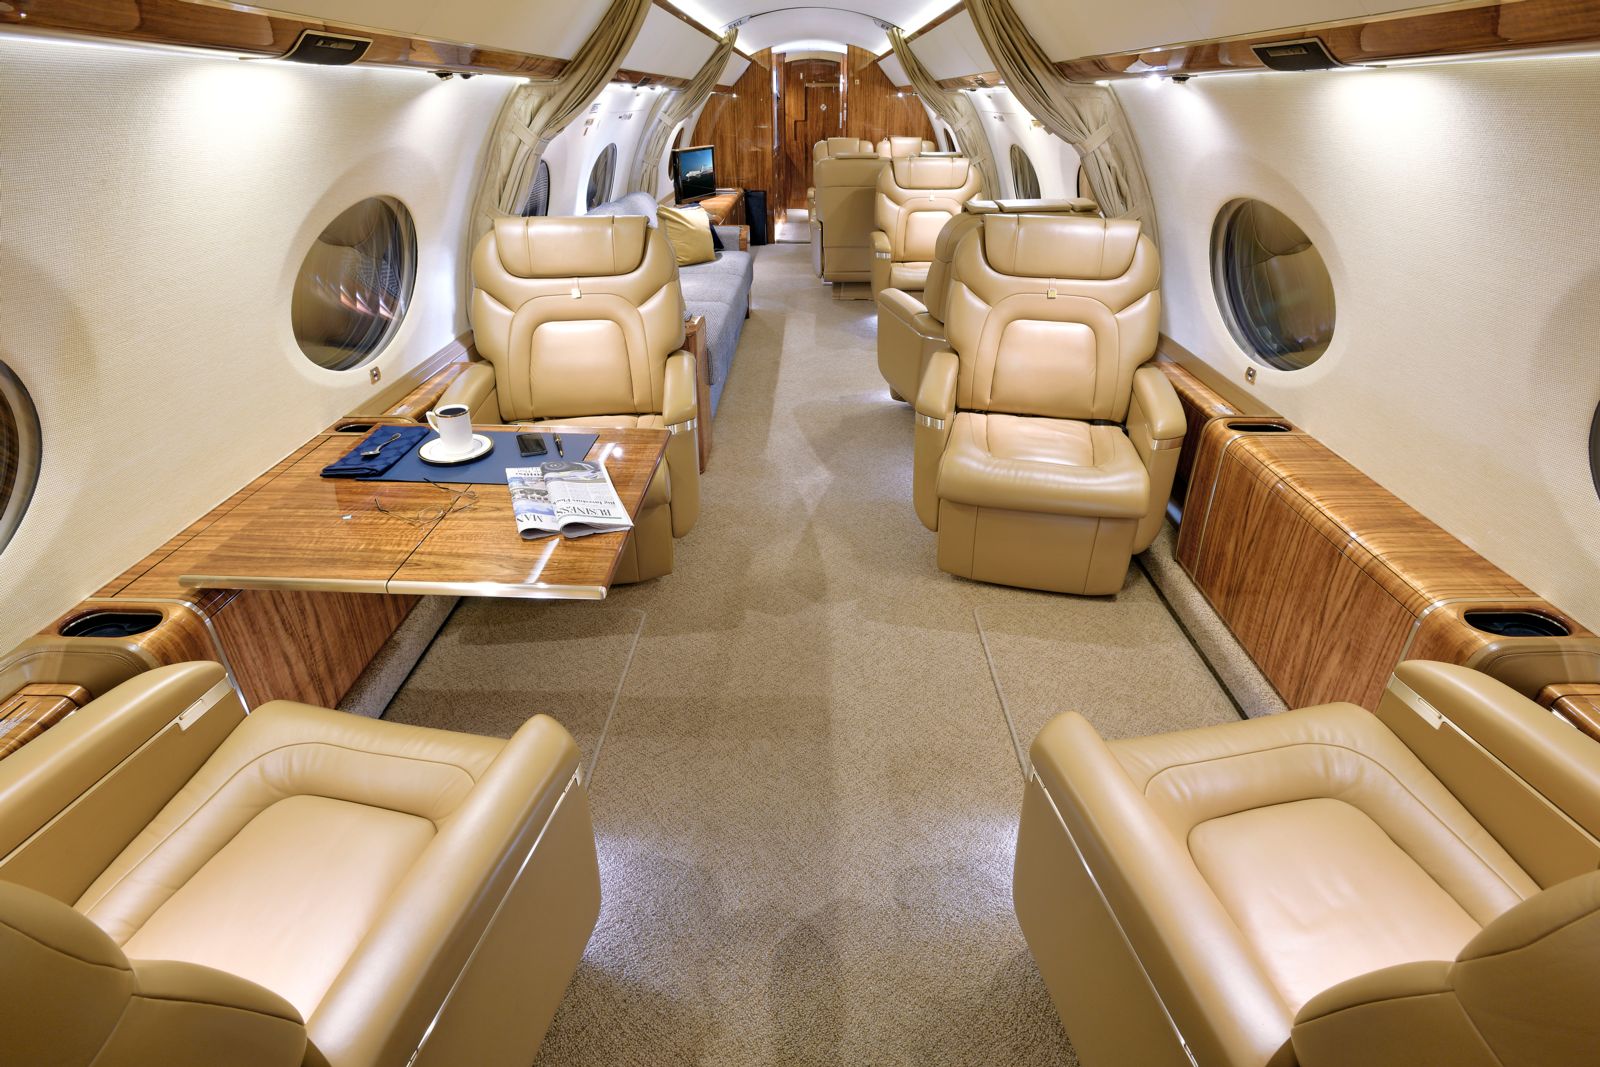 Gulfstream G650ER  S/N 6012 for sale | gallery image: /userfiles/images/G650_sn6012/fwd%20aft.jpg